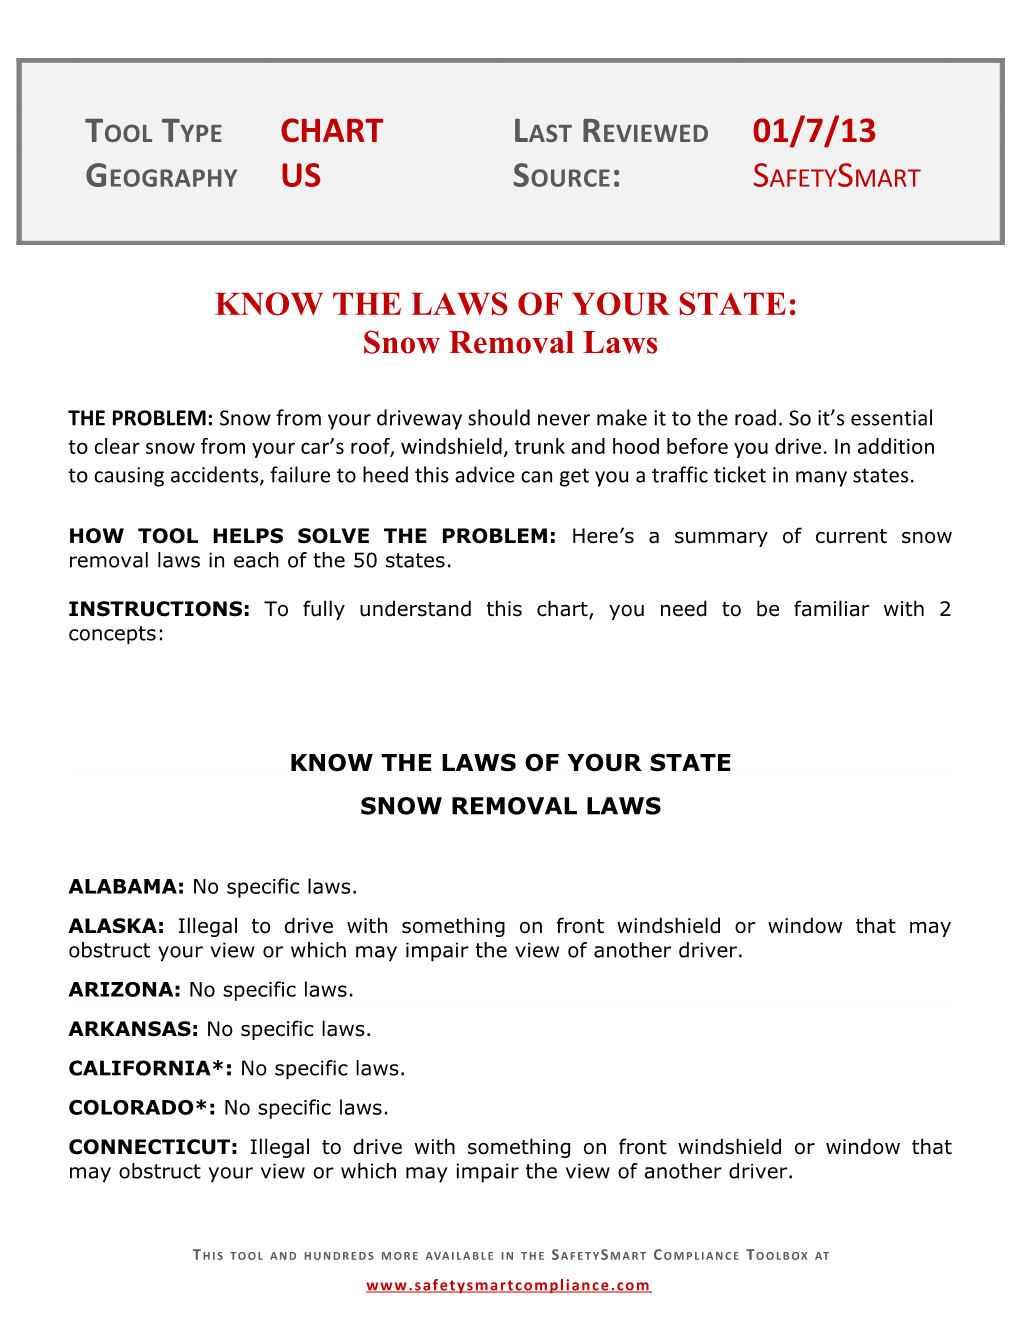 Know the Laws of Your State